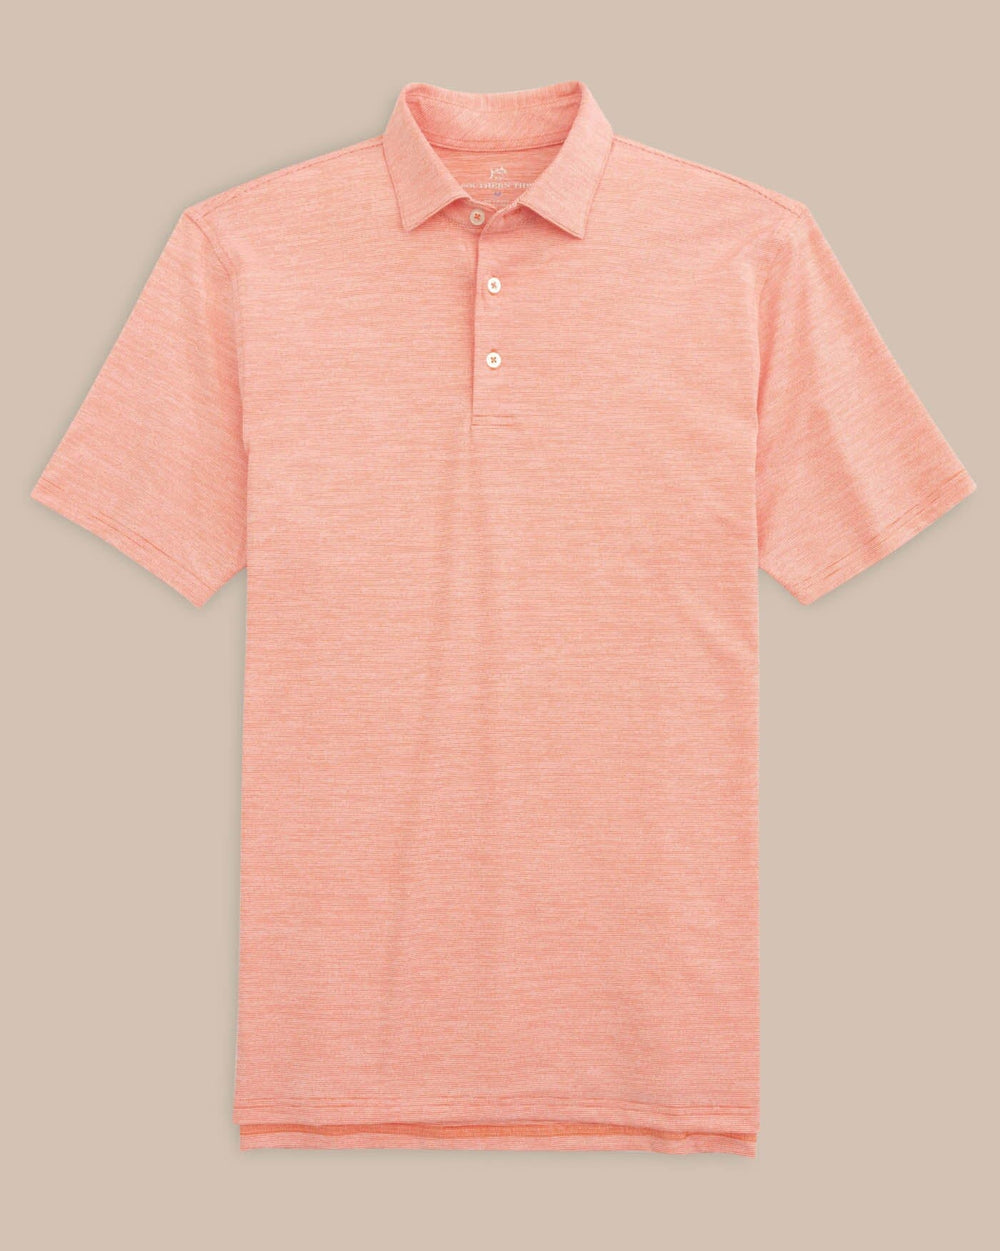 The front view of the Team Colors Driver Spacedye Polo Shirt by Southern Tide - Endzone Orange